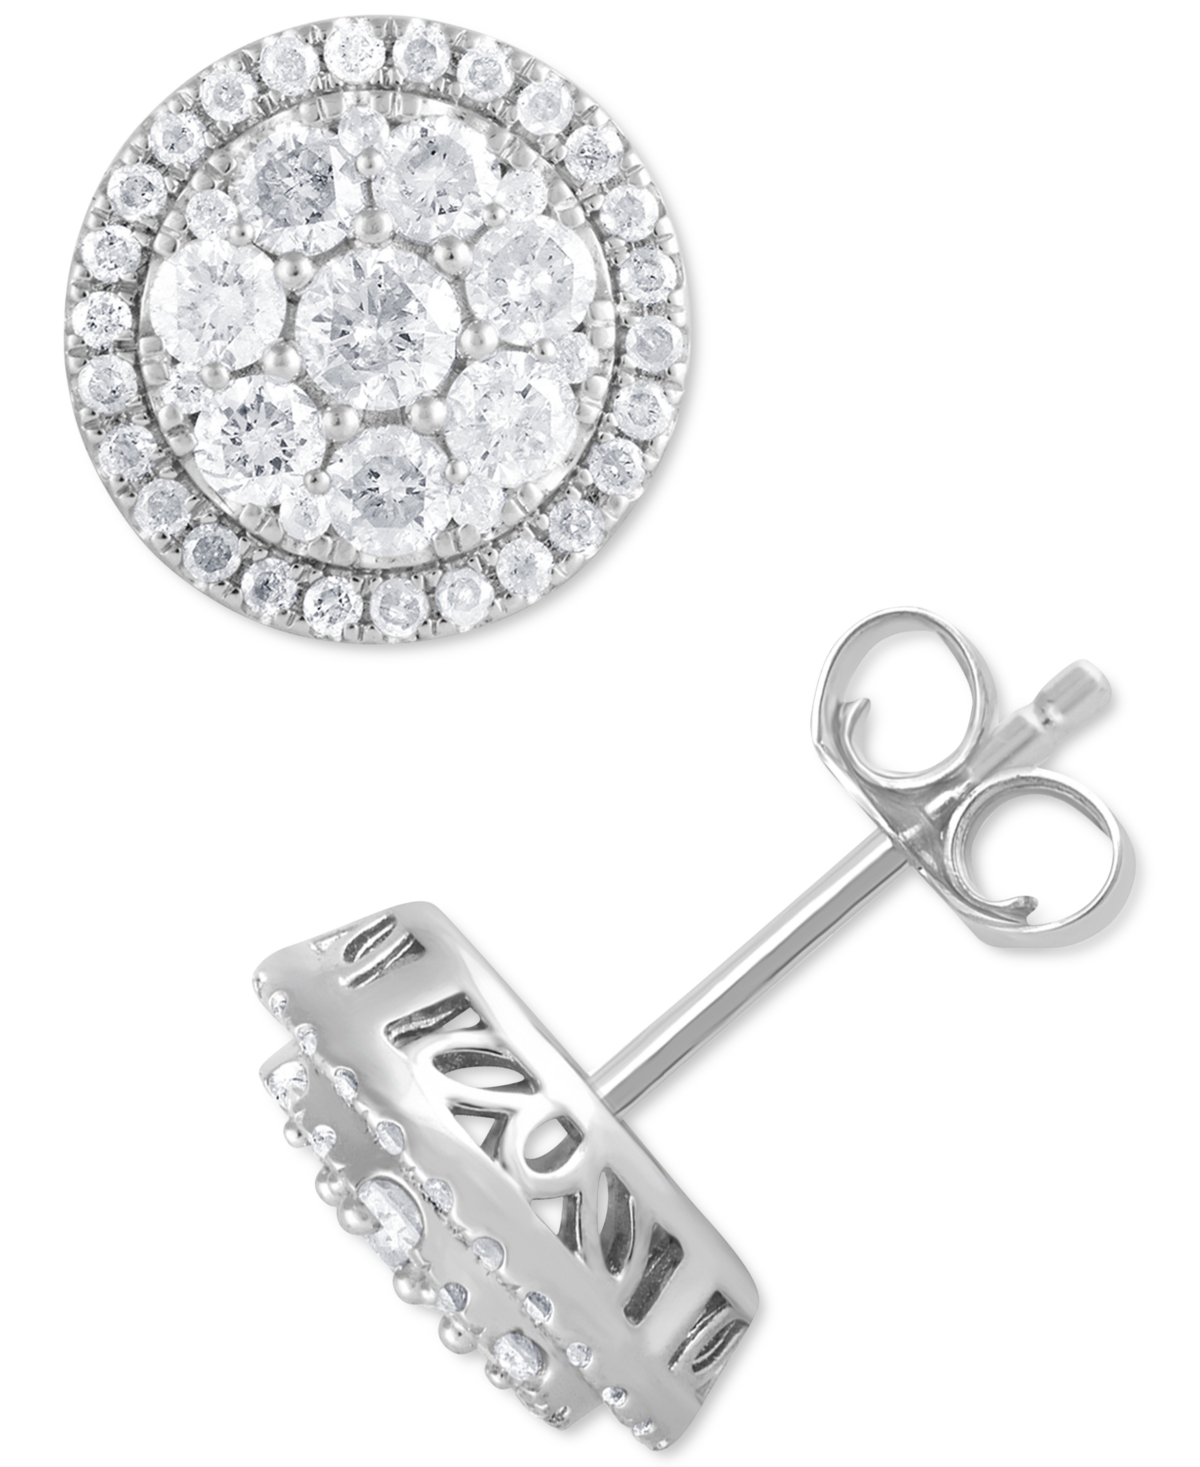 Diamond Halo Cluster Stud Earrings (1 ct. t.w.) in 14k White Gold - White Gold